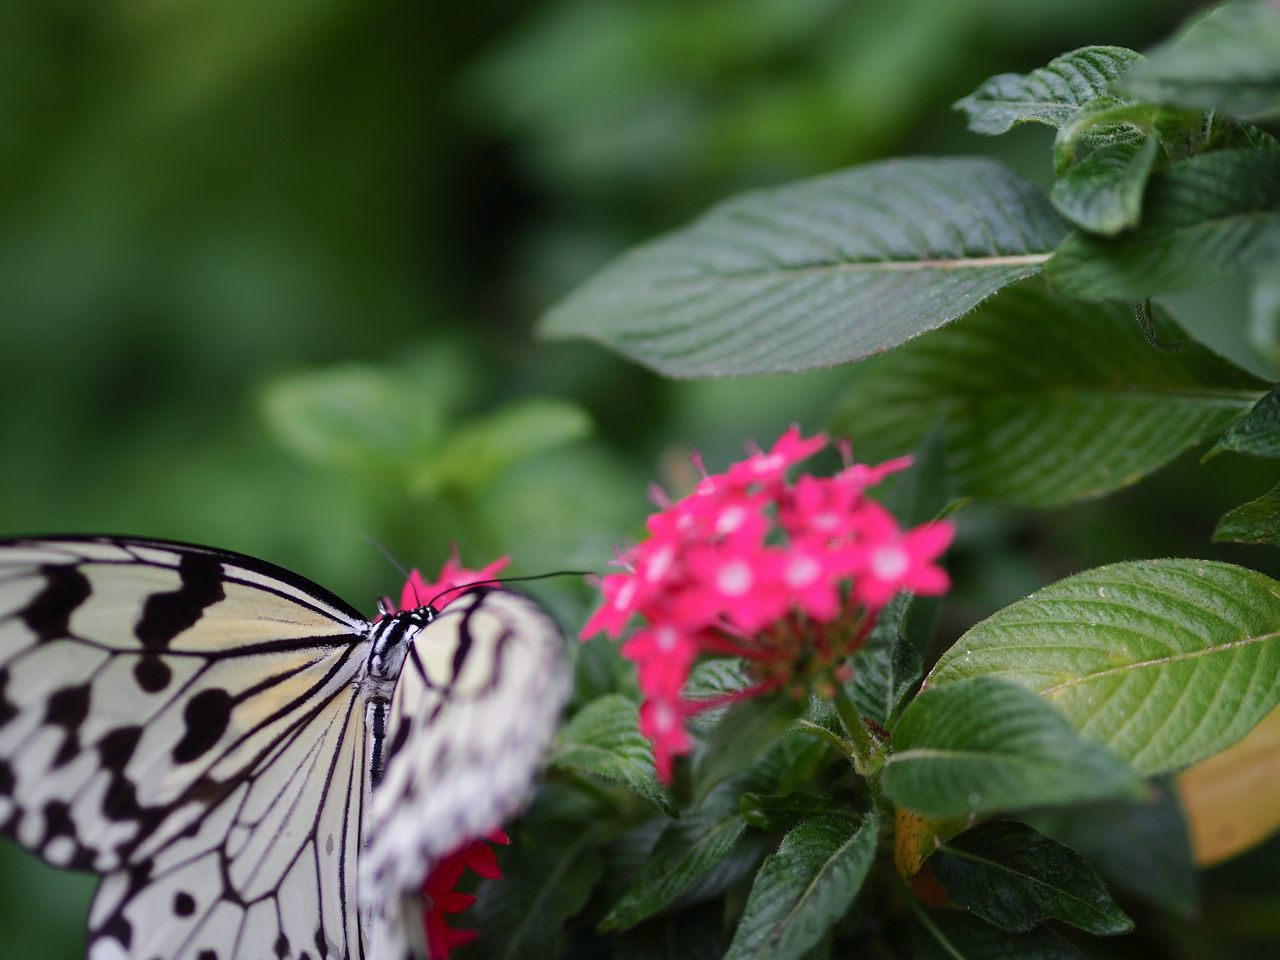 leaf, growth, green color, butterfly - insect, nature, plant, beauty in nature, fragility, no people, freshness, pink color, day, flower, outdoors, close-up, animals in the wild, animal themes, blooming, lantana camara, flower head